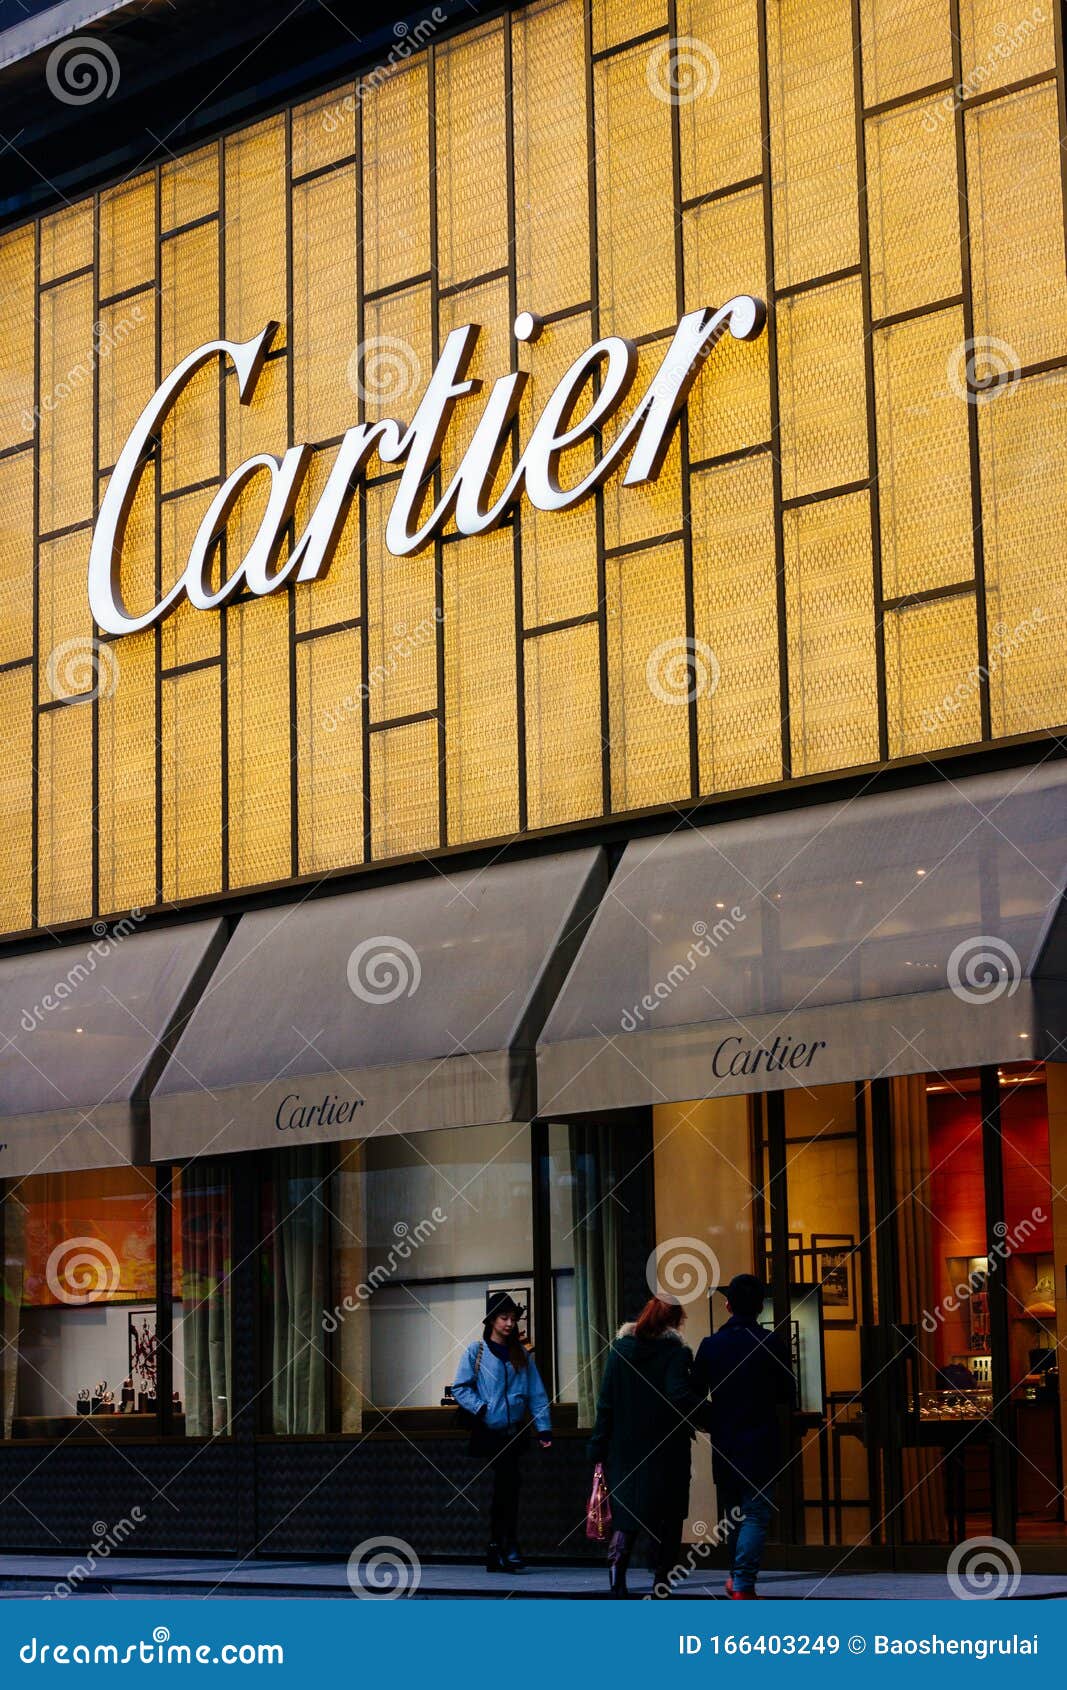 cartier french brand